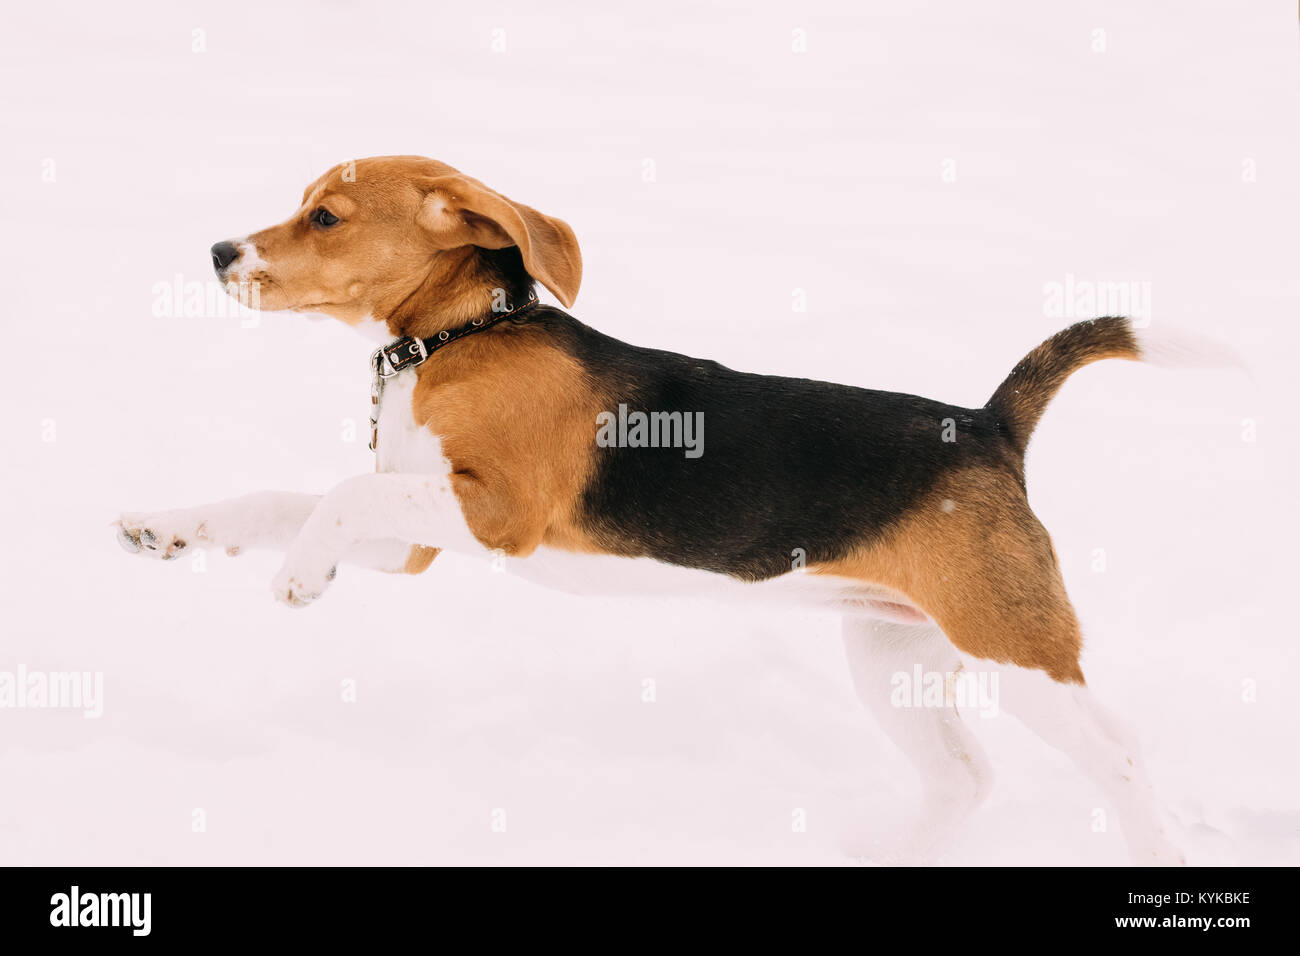 Beautiful Funny Puppy Of English Beagle Playing Fast Running In Snow At Winter Day. Beagle Is A Breed Of Small Hound, Similar In Appearance To The Muc Stock Photo